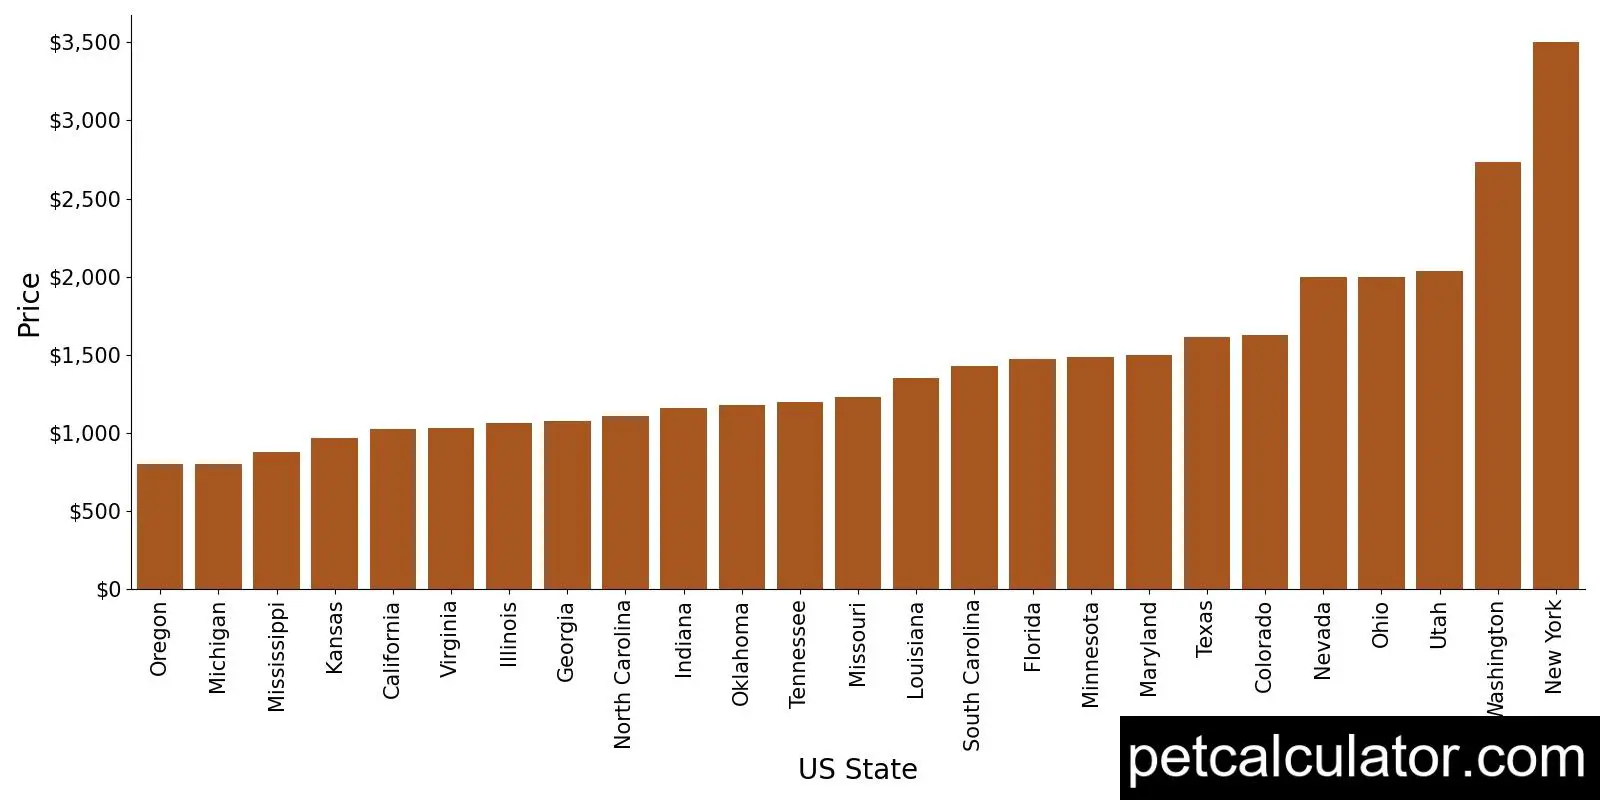 Price of Peek A Poo by US State 